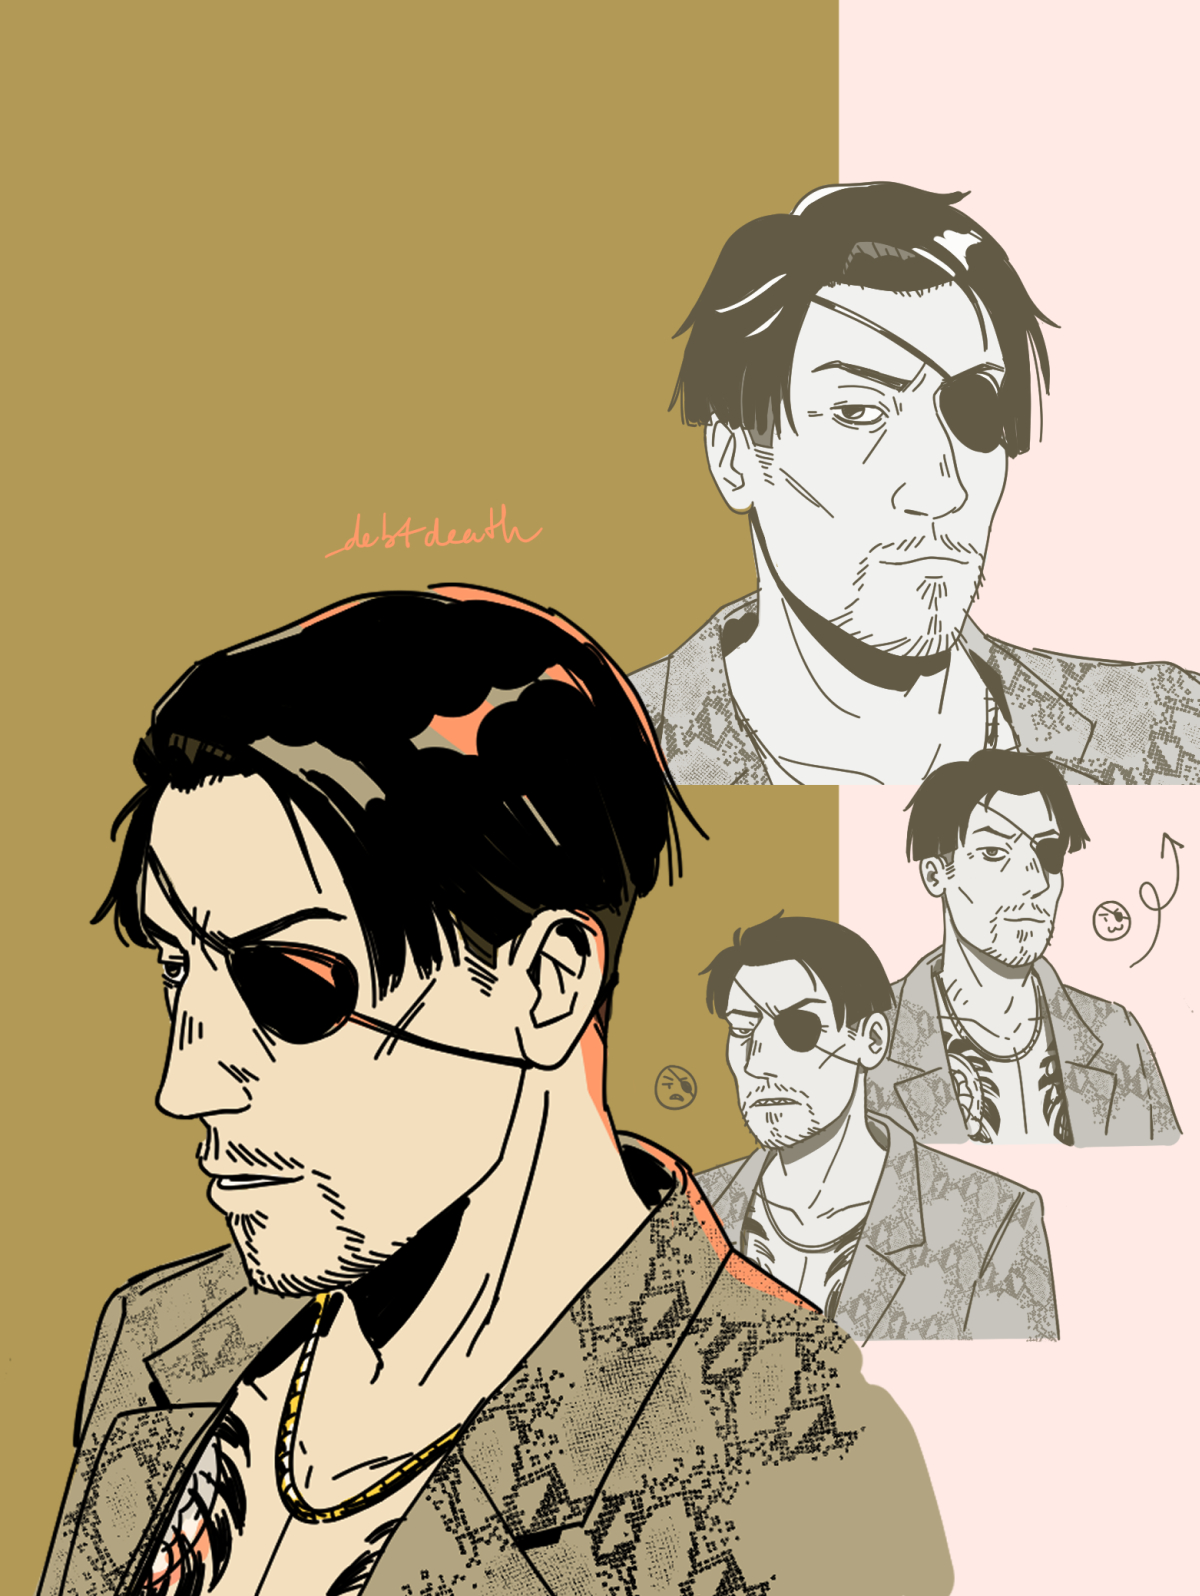 Sketches of Majima with different expressions.